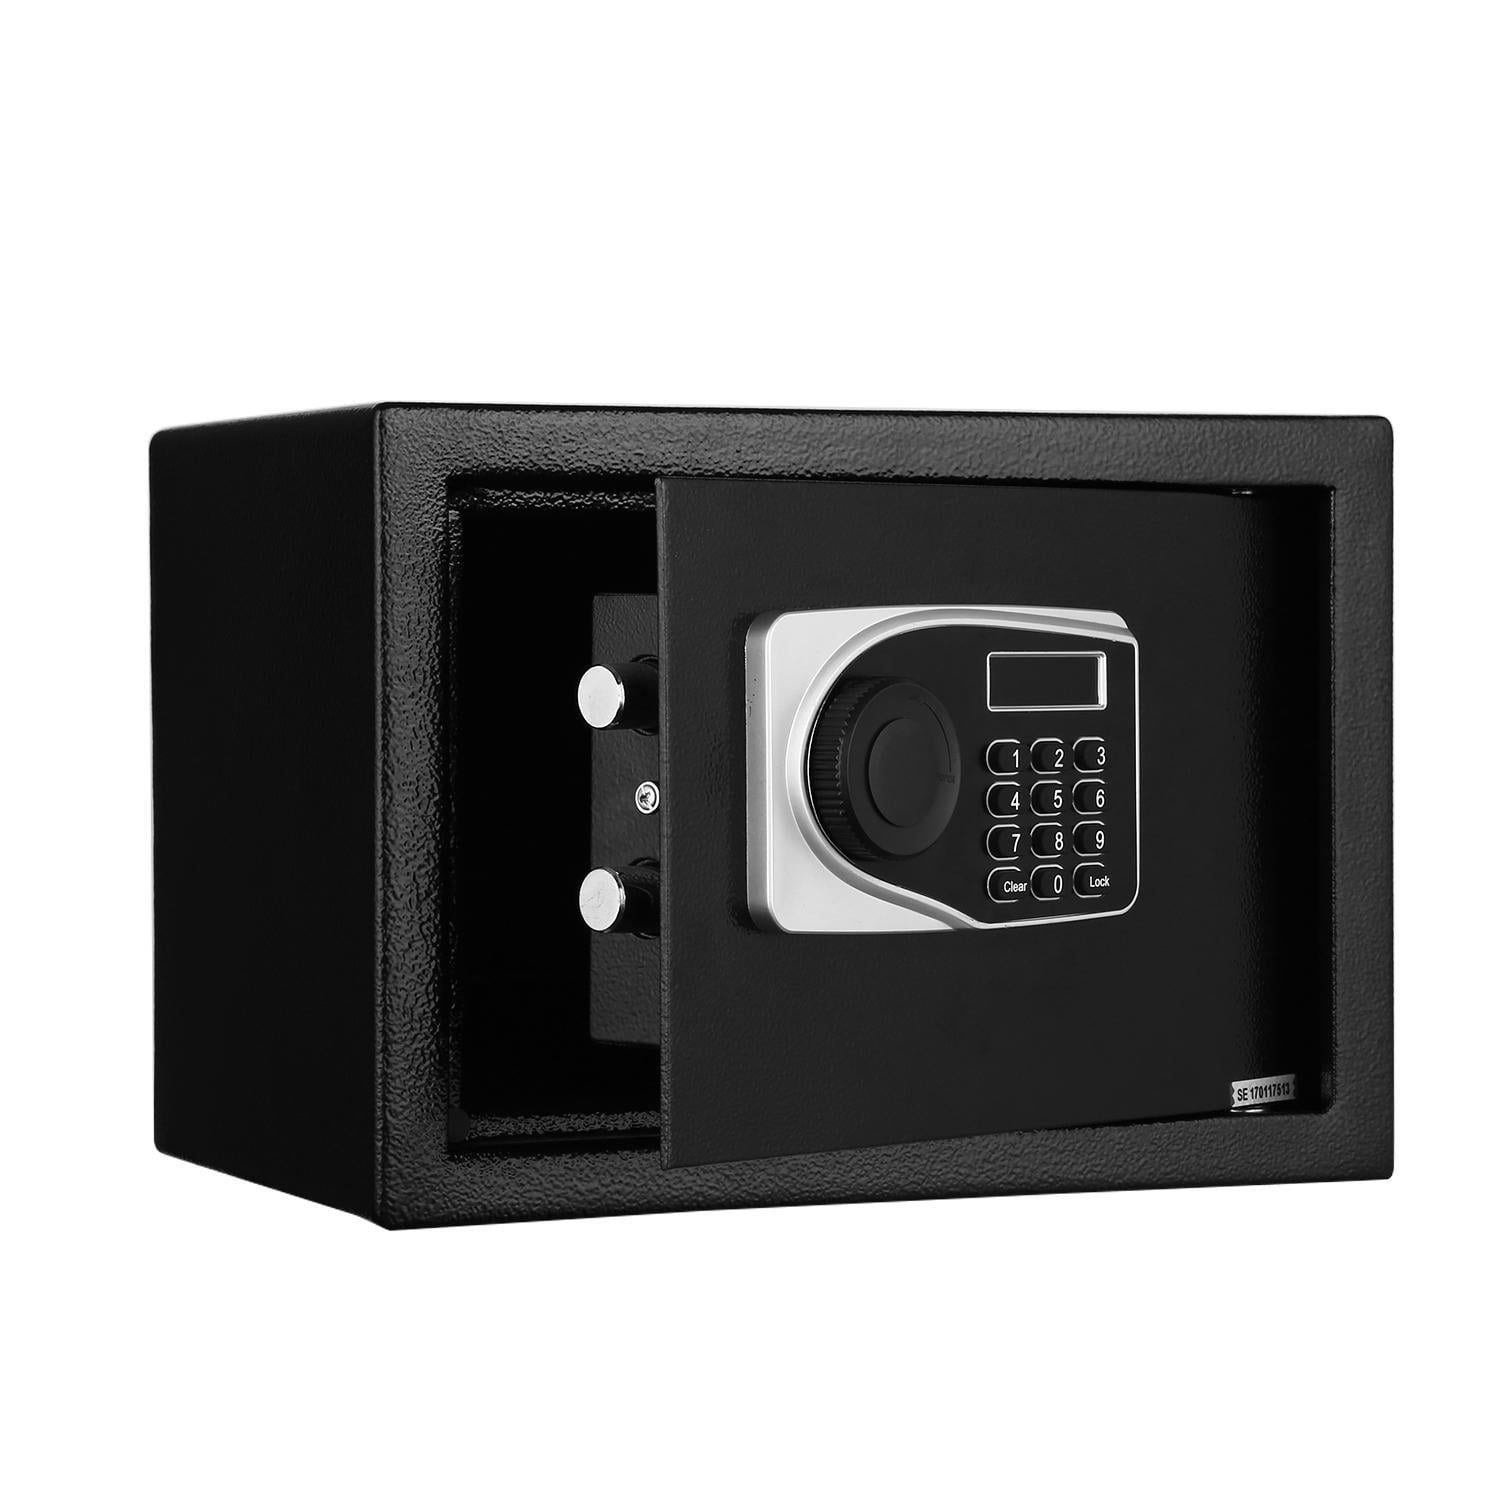 Details about   Wall Safe Digital Electronic Safe Box Keypad Lock Security Cash Gun Home Office 